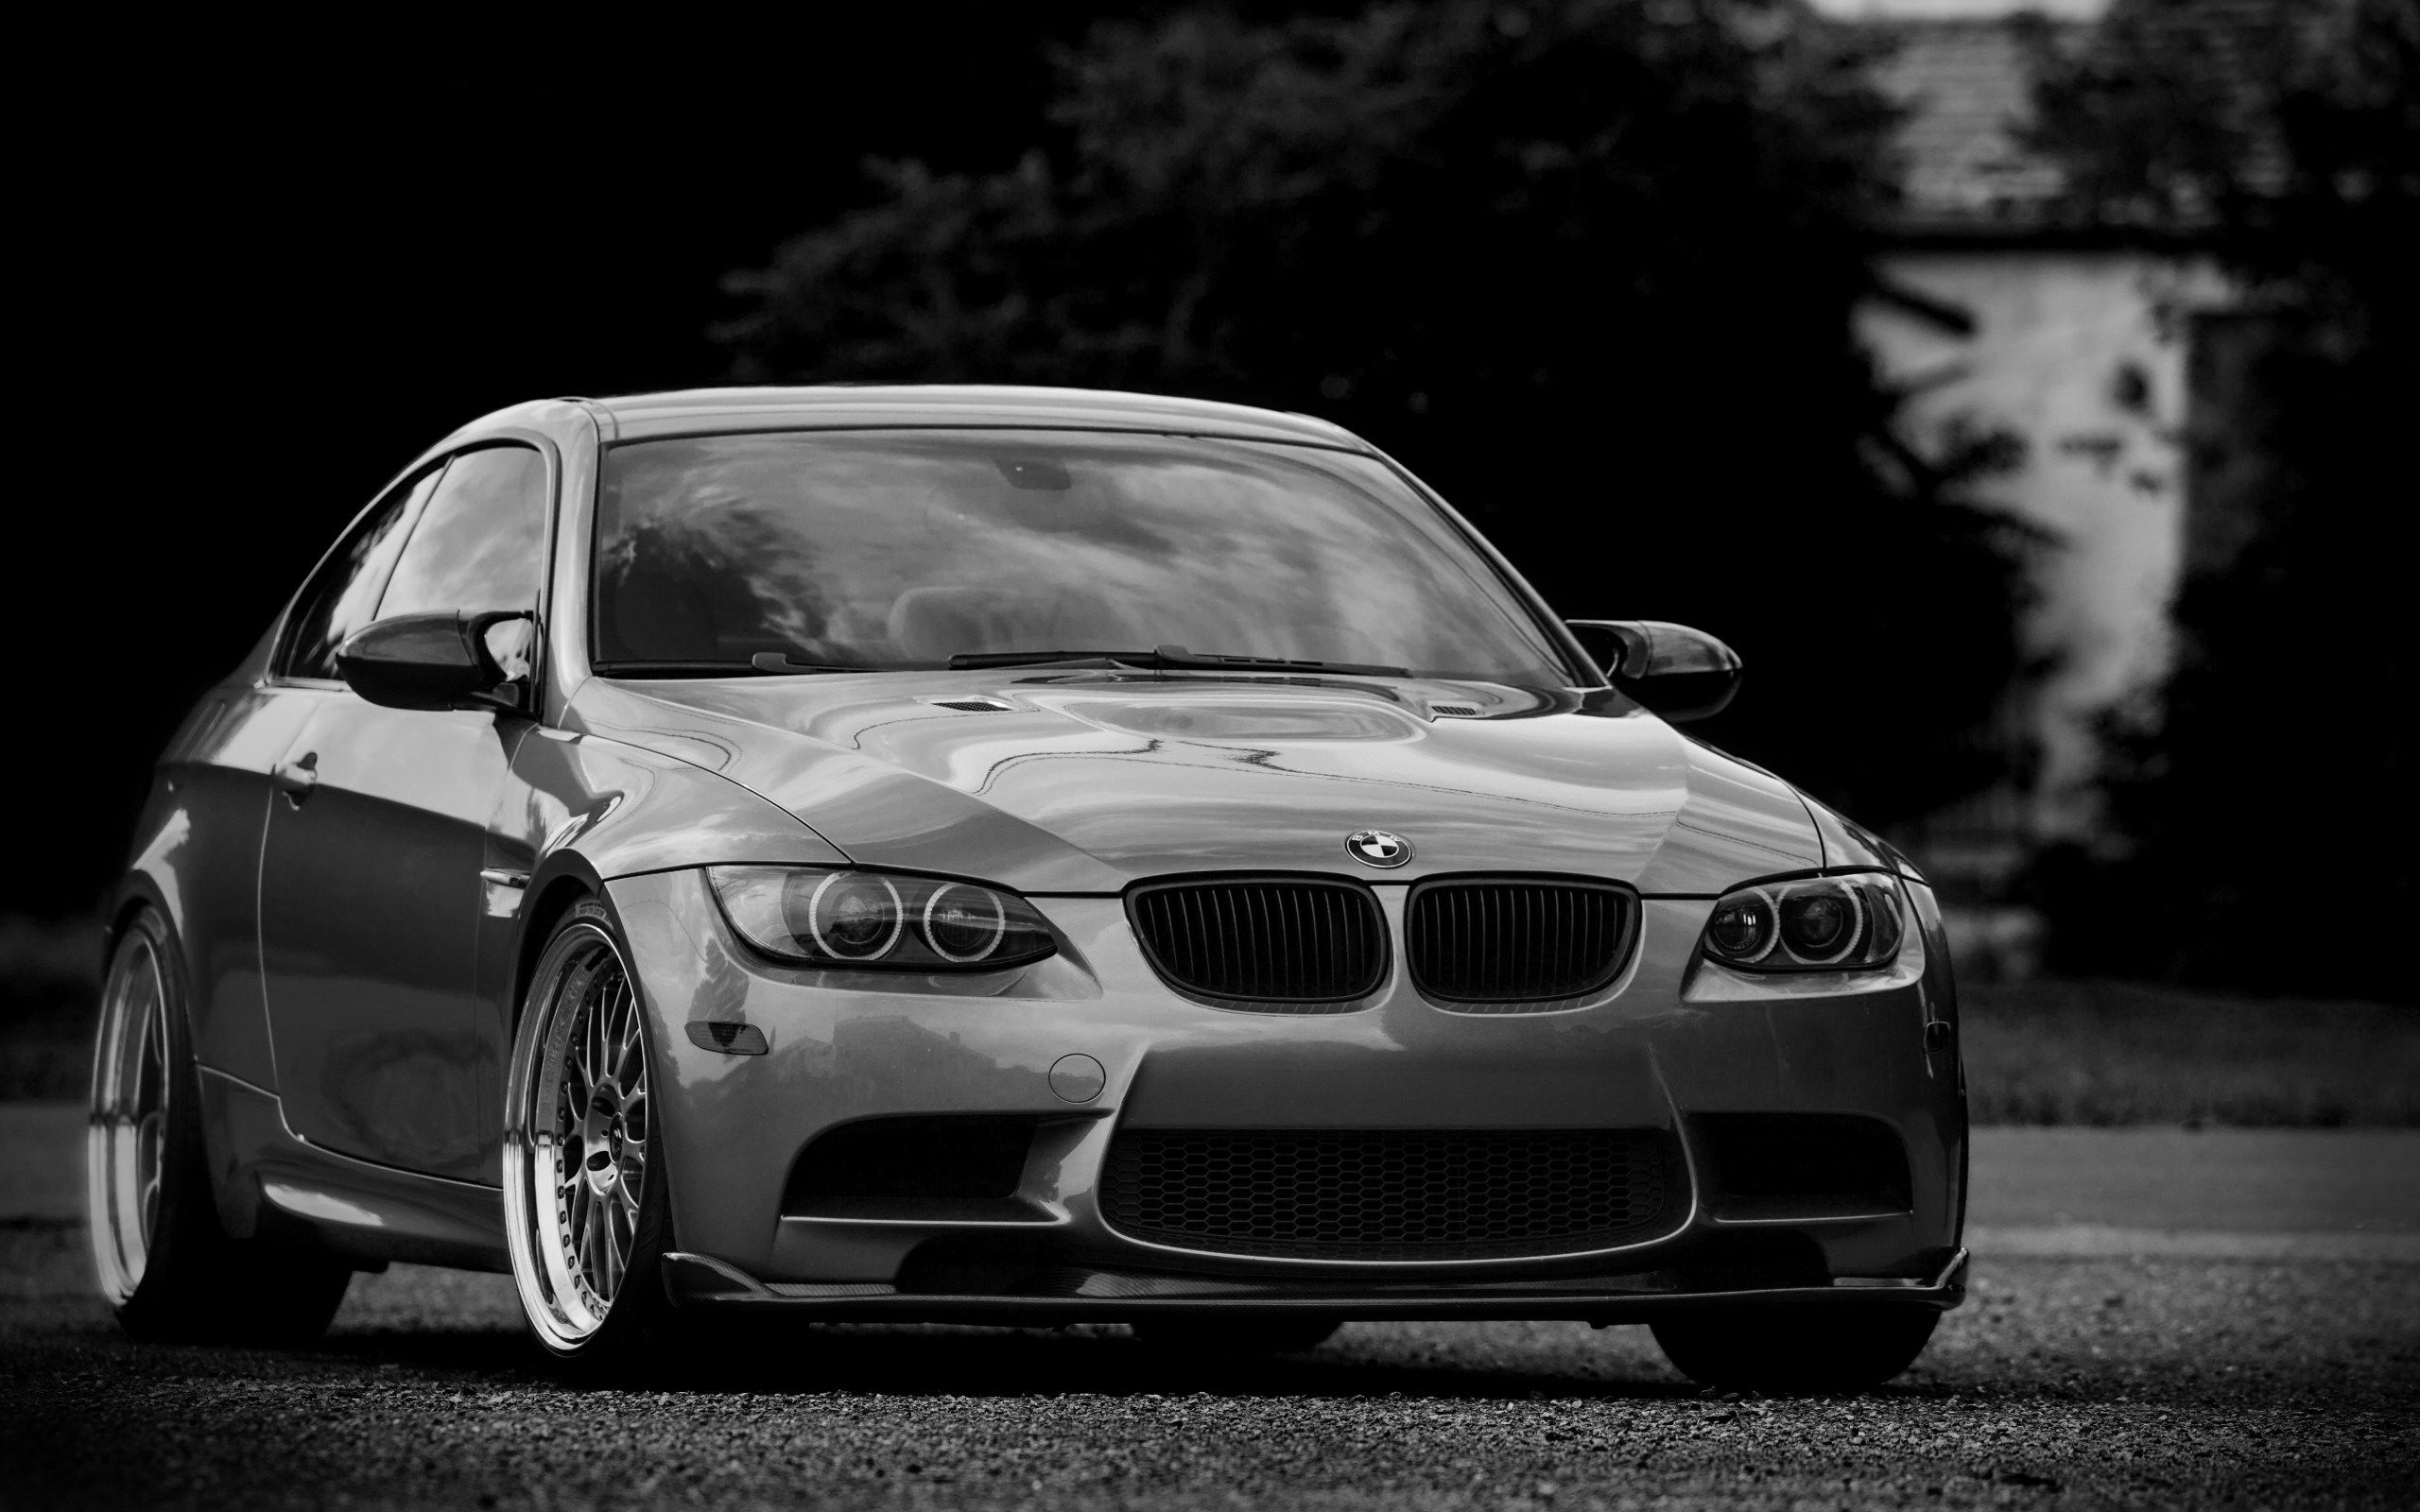 Black & White BMW M3 Wallpaper | Full HD Pictures